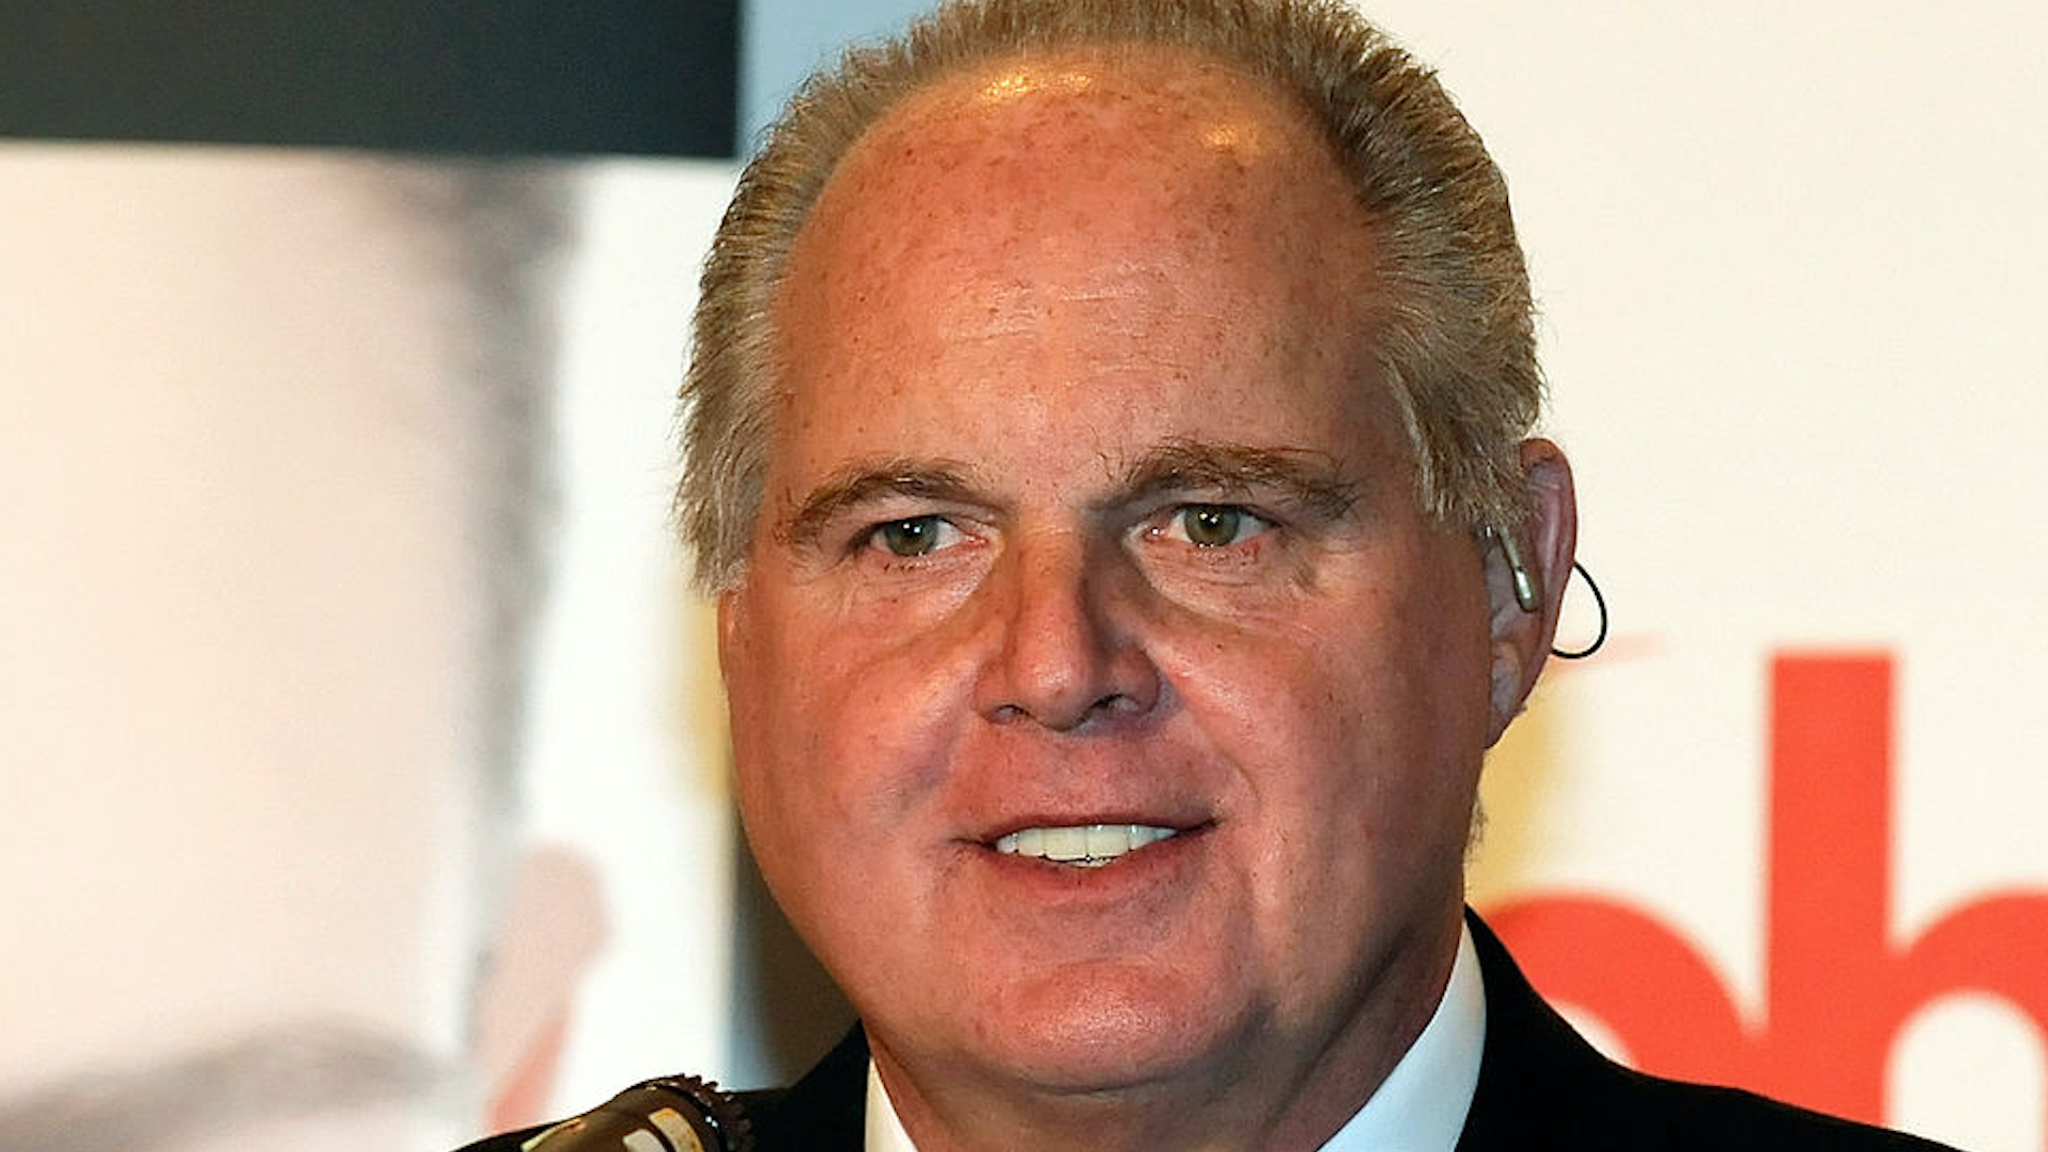 Radio talk show host and conservative commentator Rush Limbaugh, one of the judges for the 2010 Miss America Pageant, speaks during a news conference for judges at the Planet Hollywood Resort & Casino January 27, 2010 in Las Vegas, Nevada.